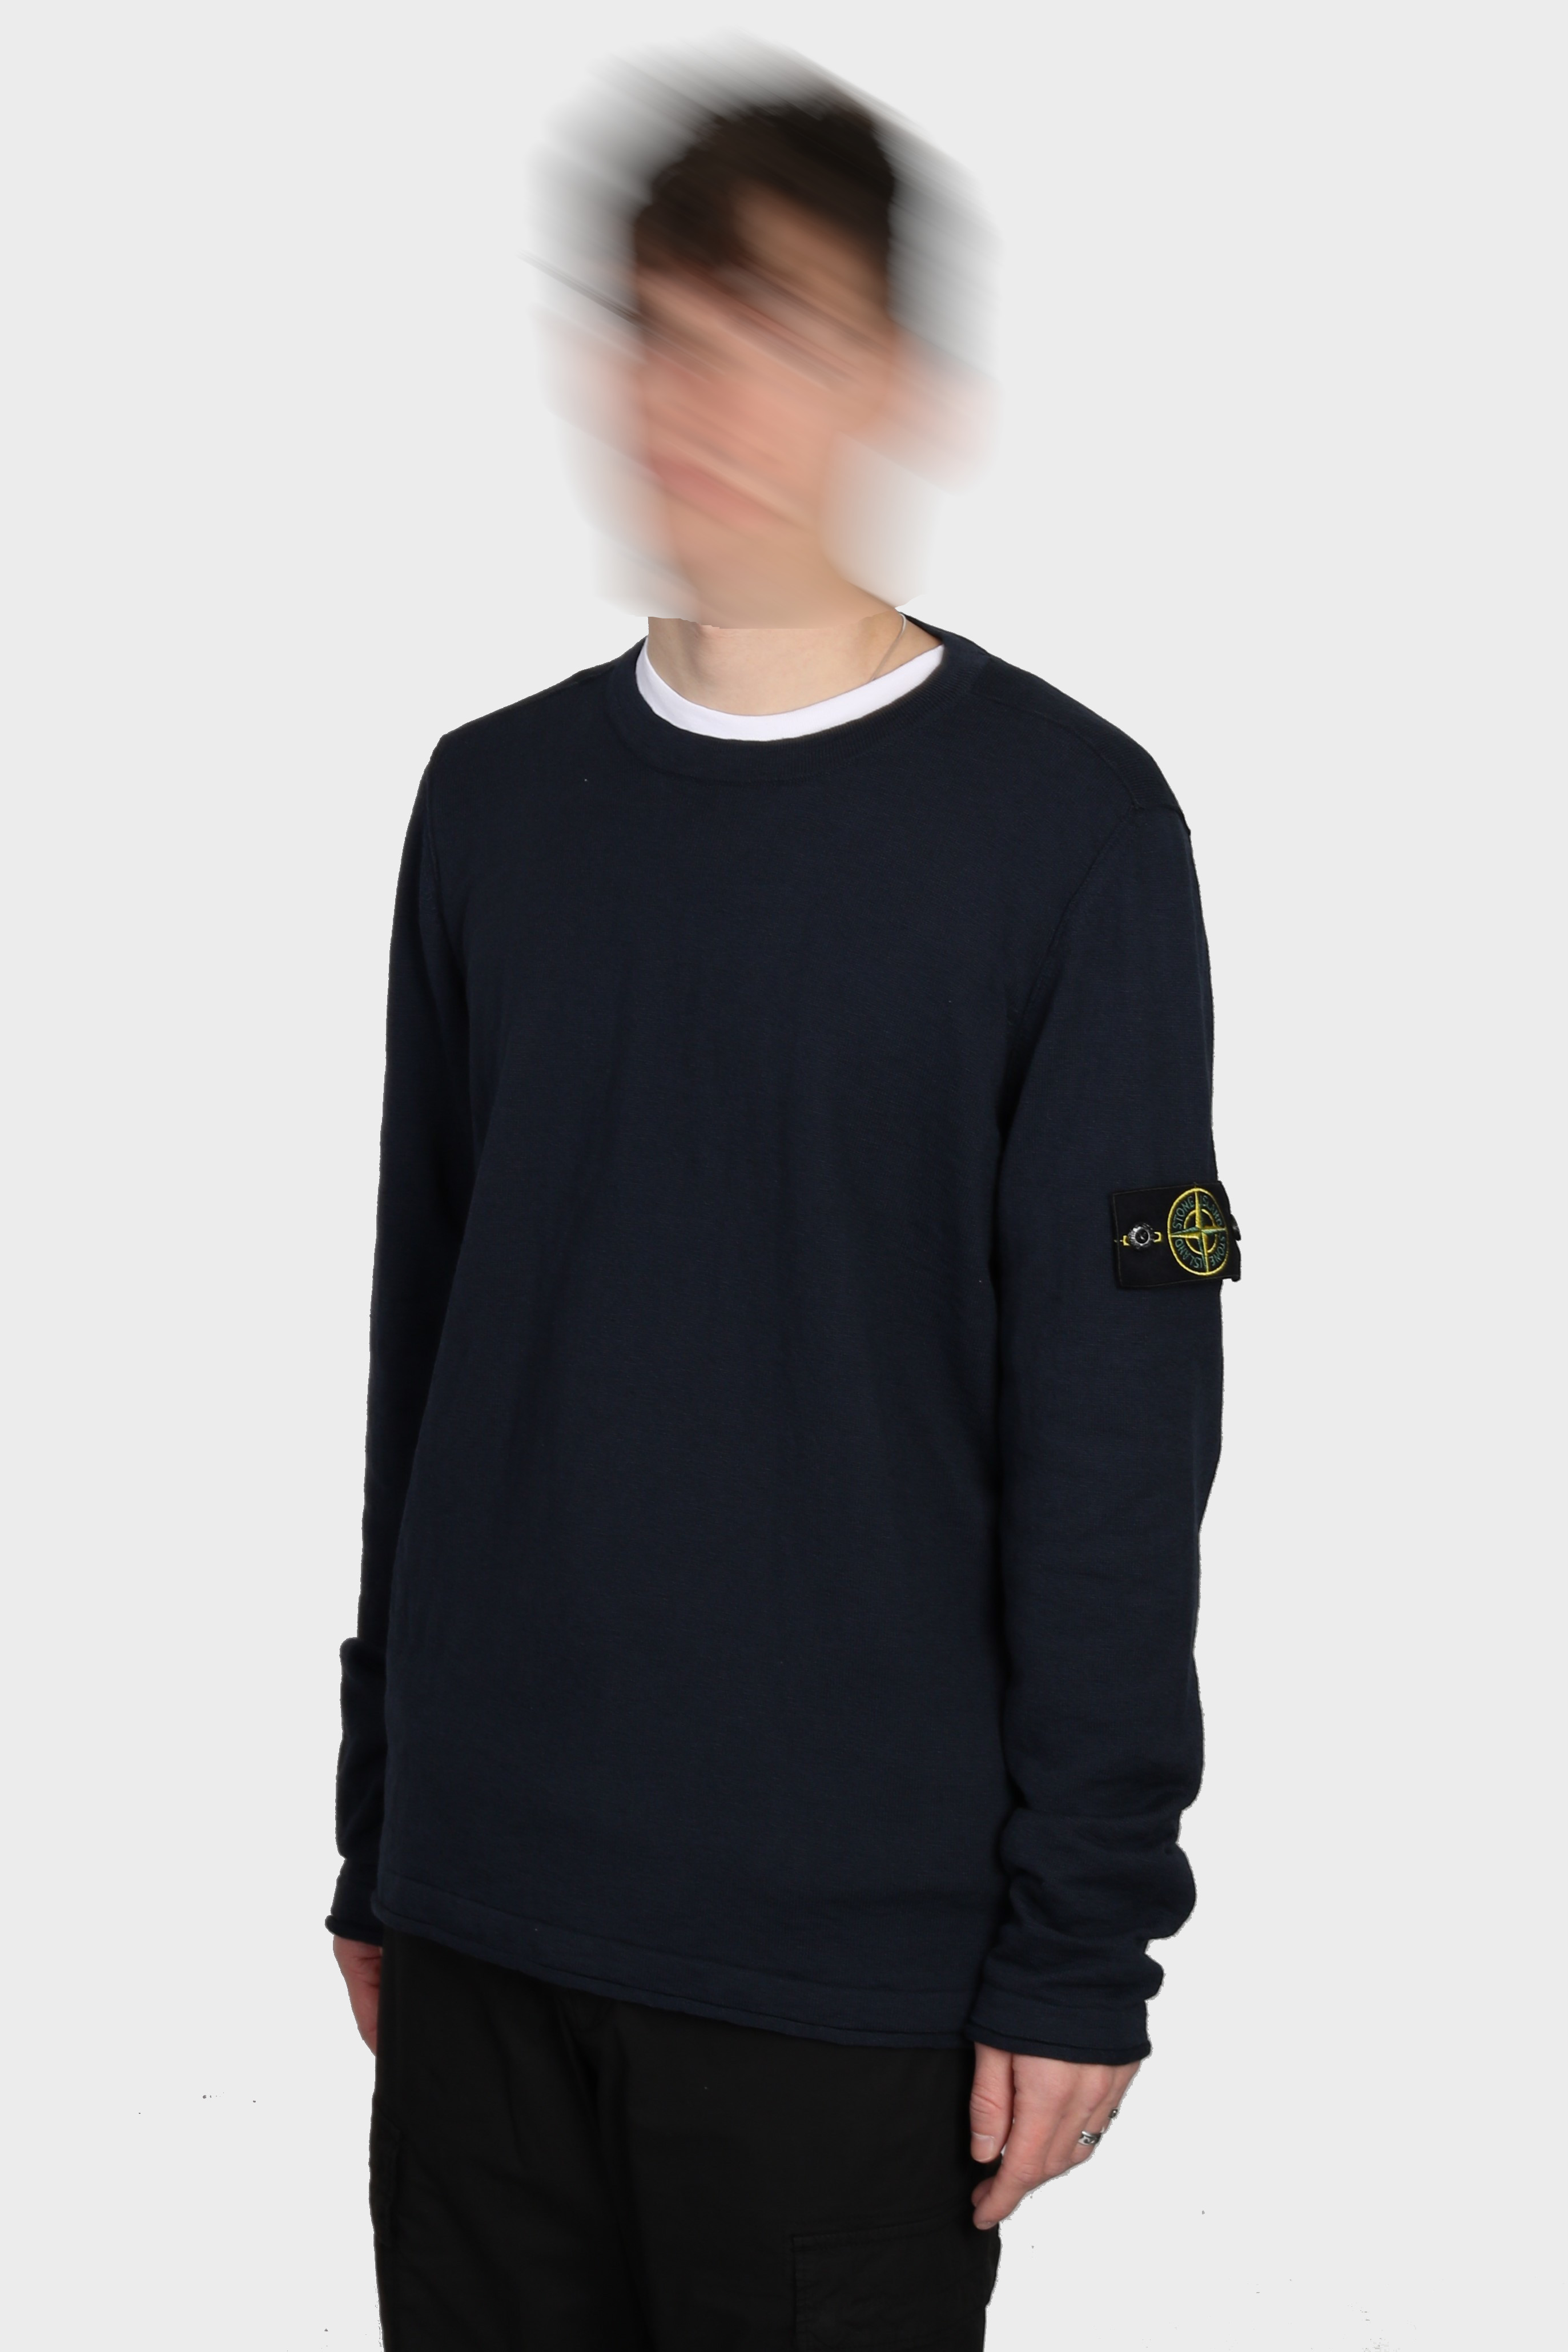 STONE ISLAND Summer Knit Pullover in Navy 3XL